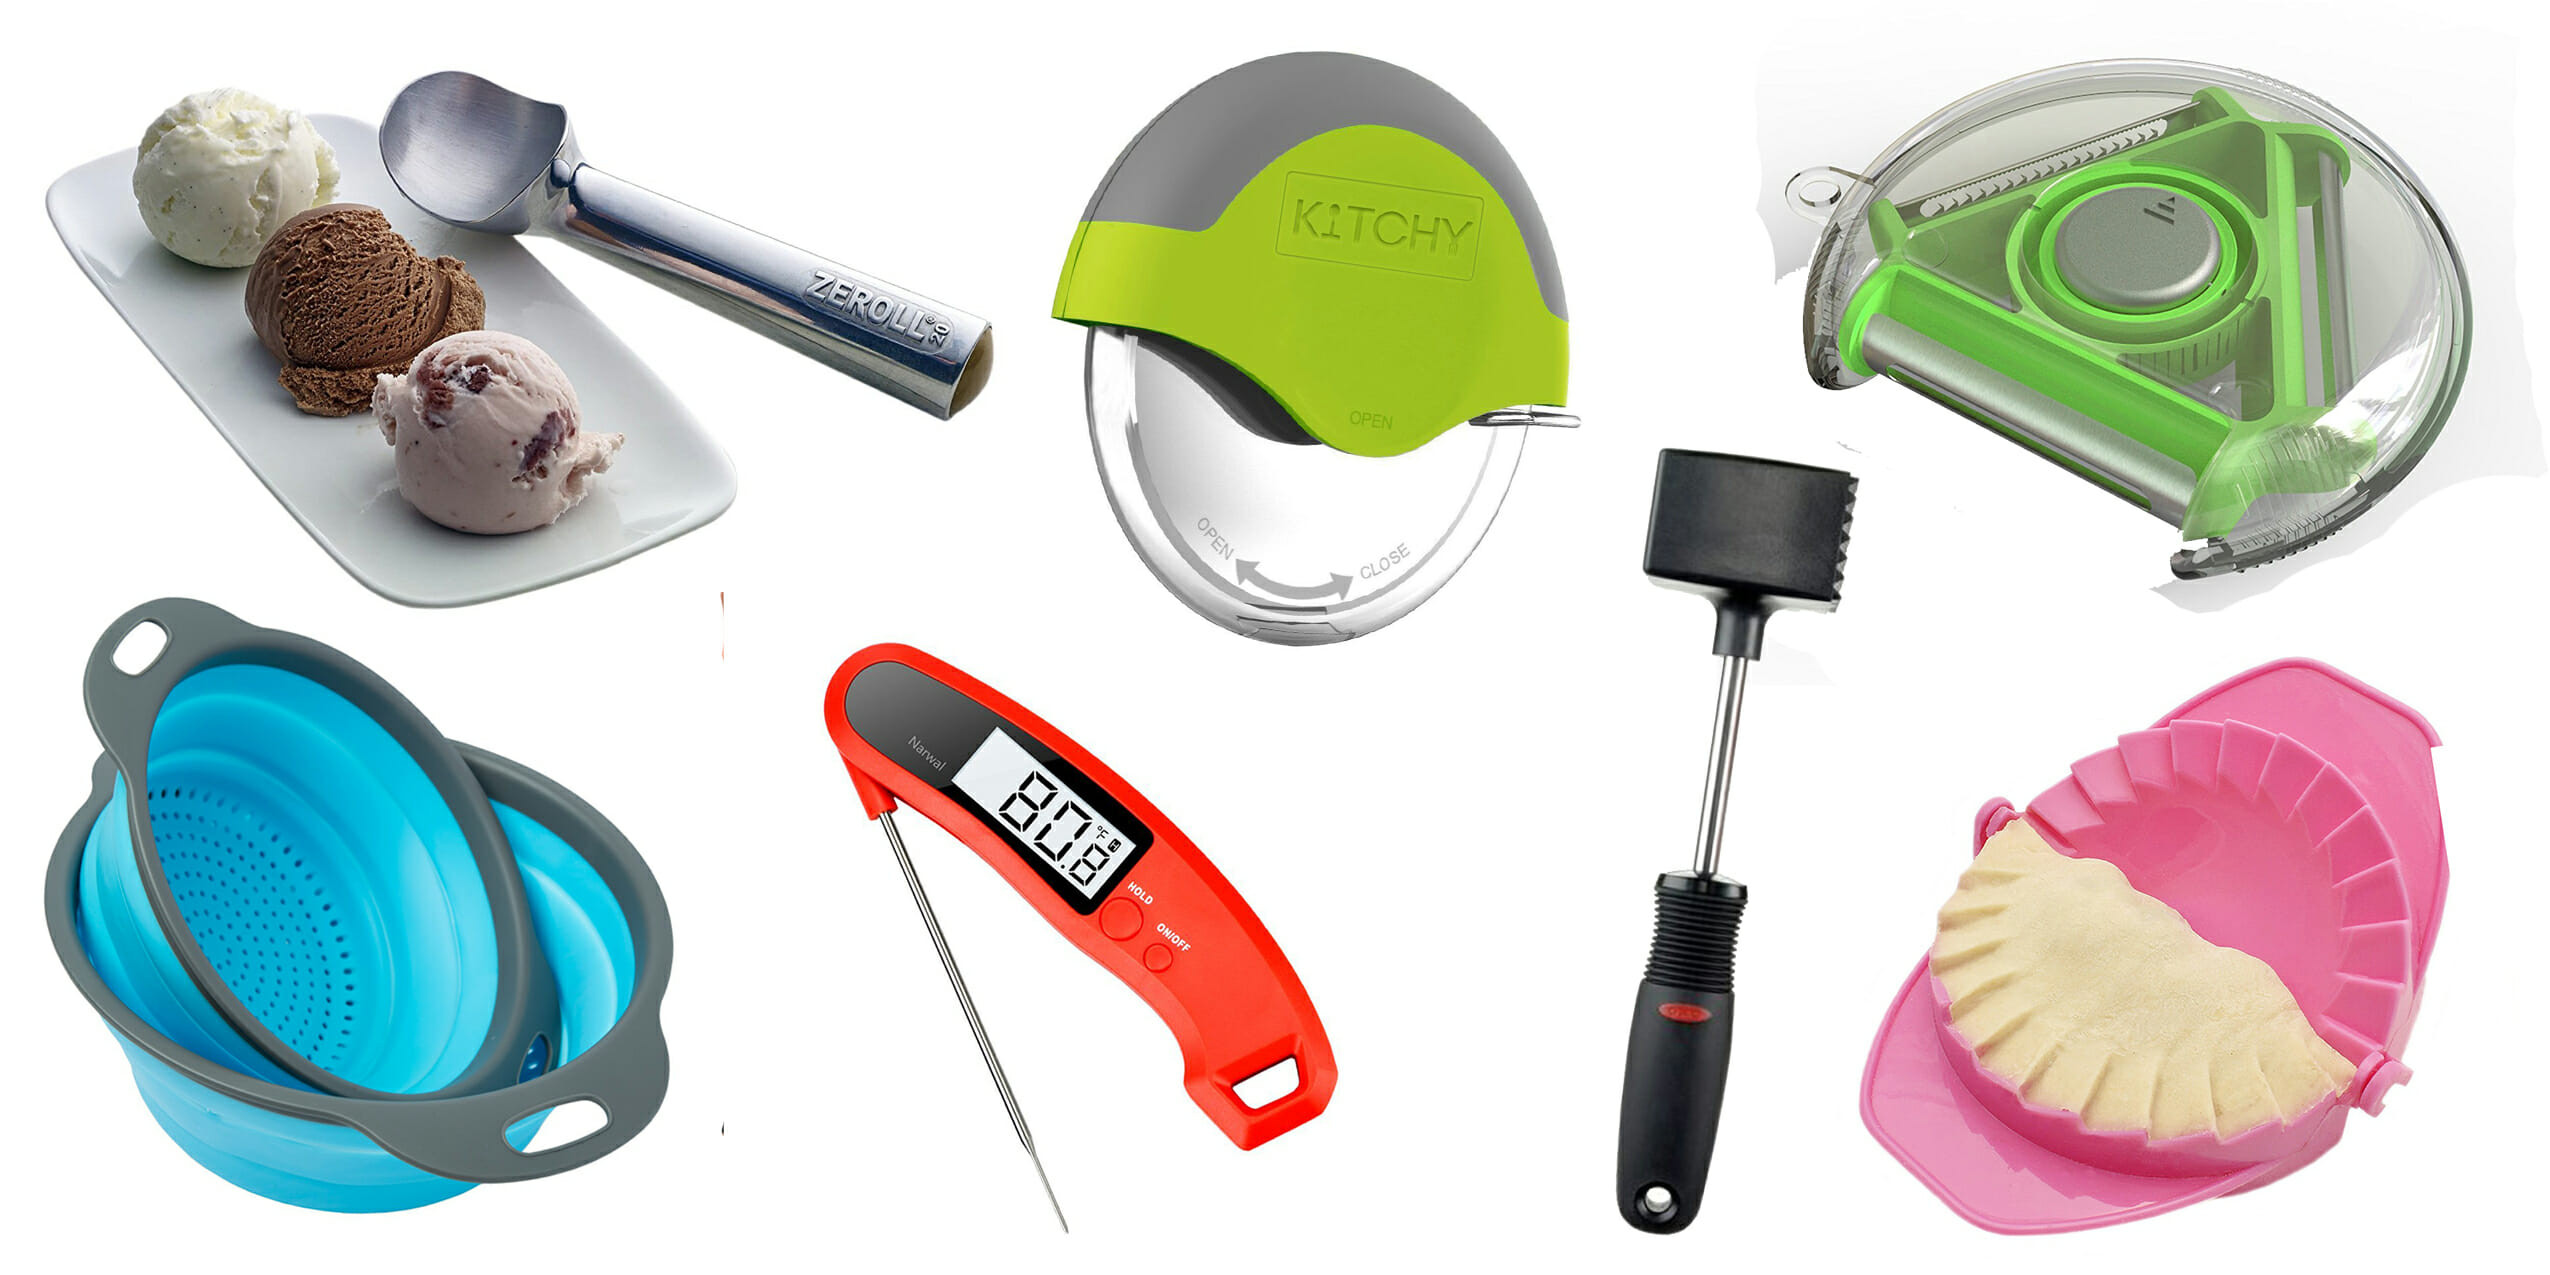 Small Kitchen Gadgets
 The 10 best kitchen gad s to add to your collection